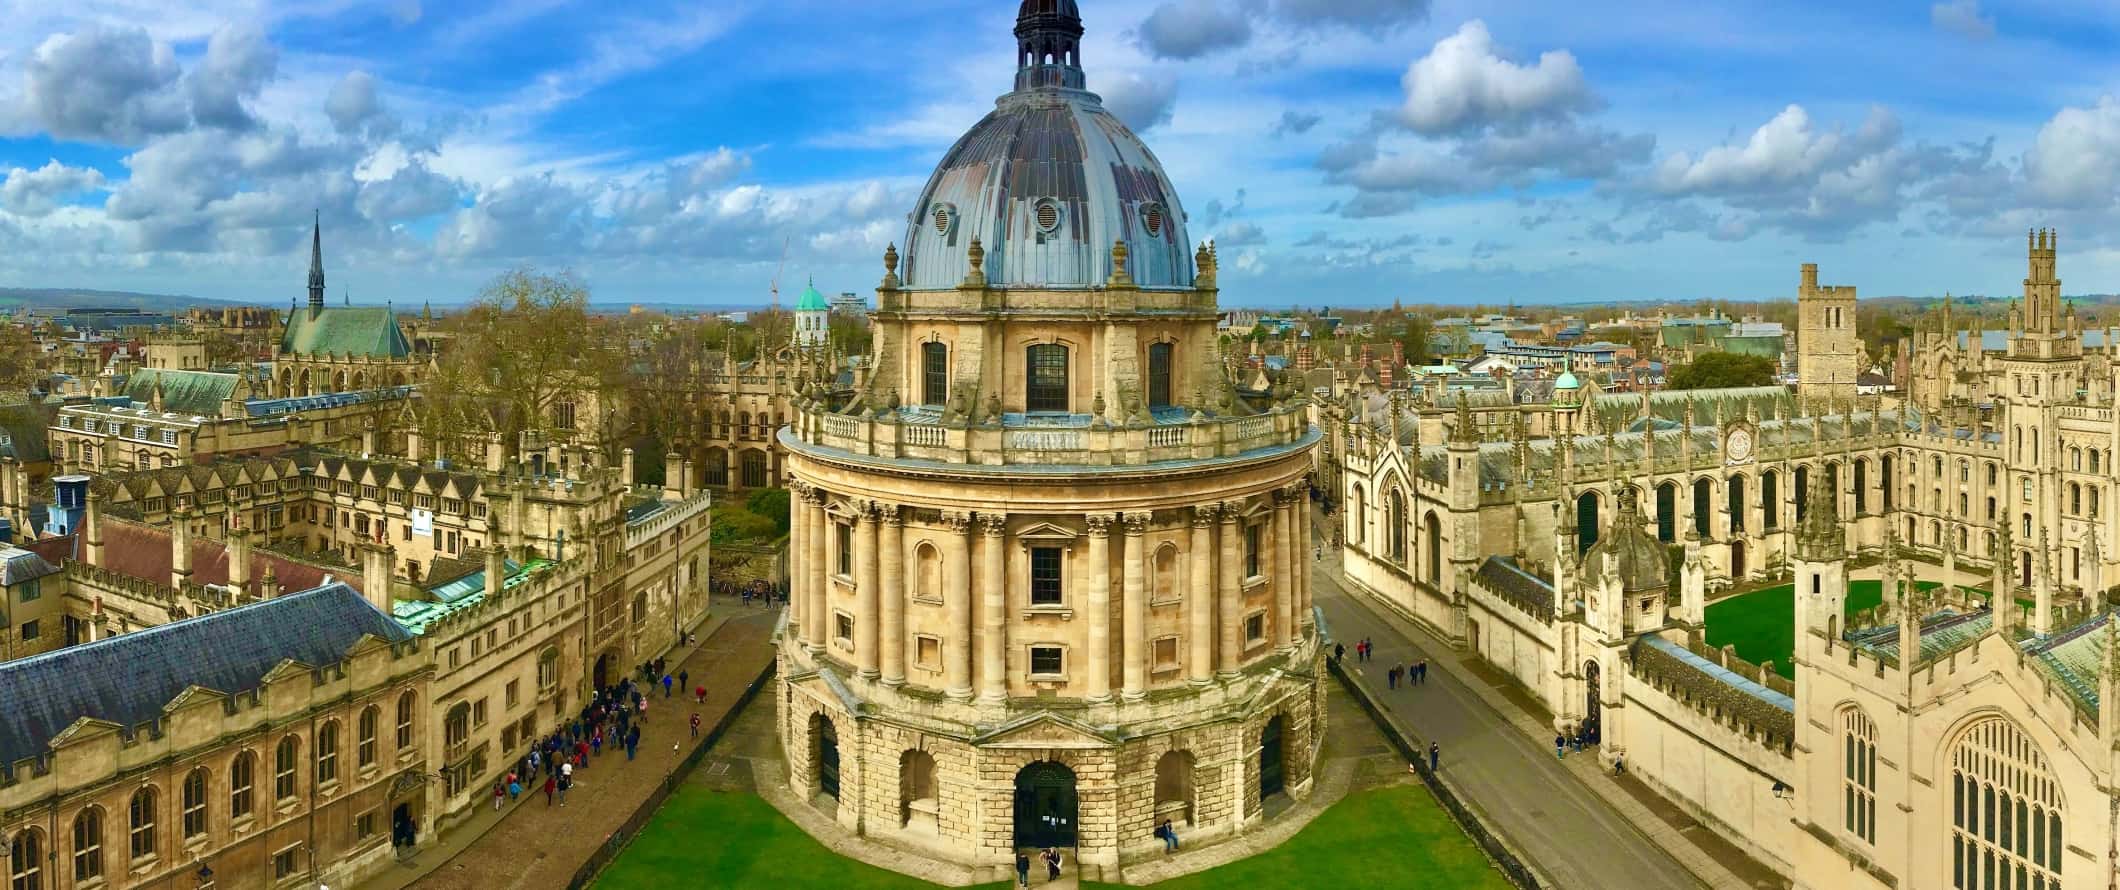 View of the circular Radcliffe Camera building at the University of Oxford in the town of Oxford, England